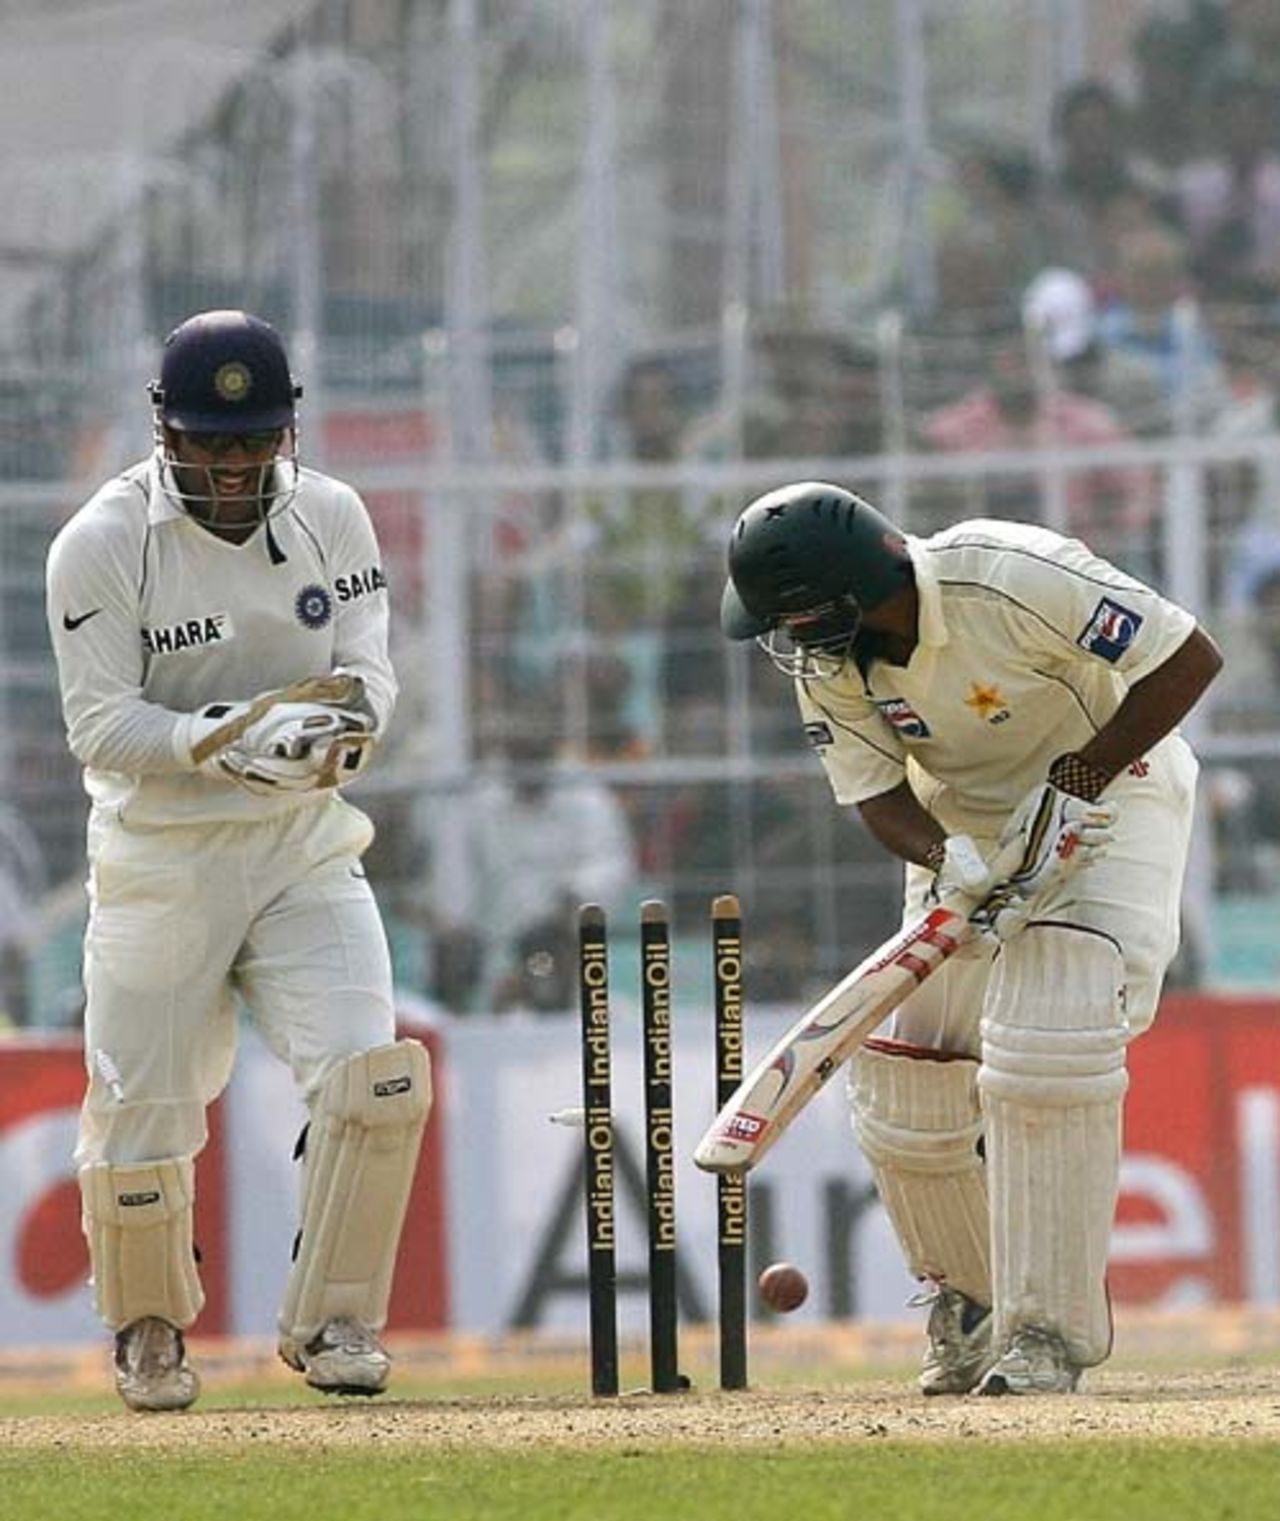 Mahendra Singh Dhoni celebrates after Mohammad Yousuf is cleaned up by Harbhajan Singh, India v Pakistan, 2nd Test, Kolkata, 3rd day, December 2, 2007
